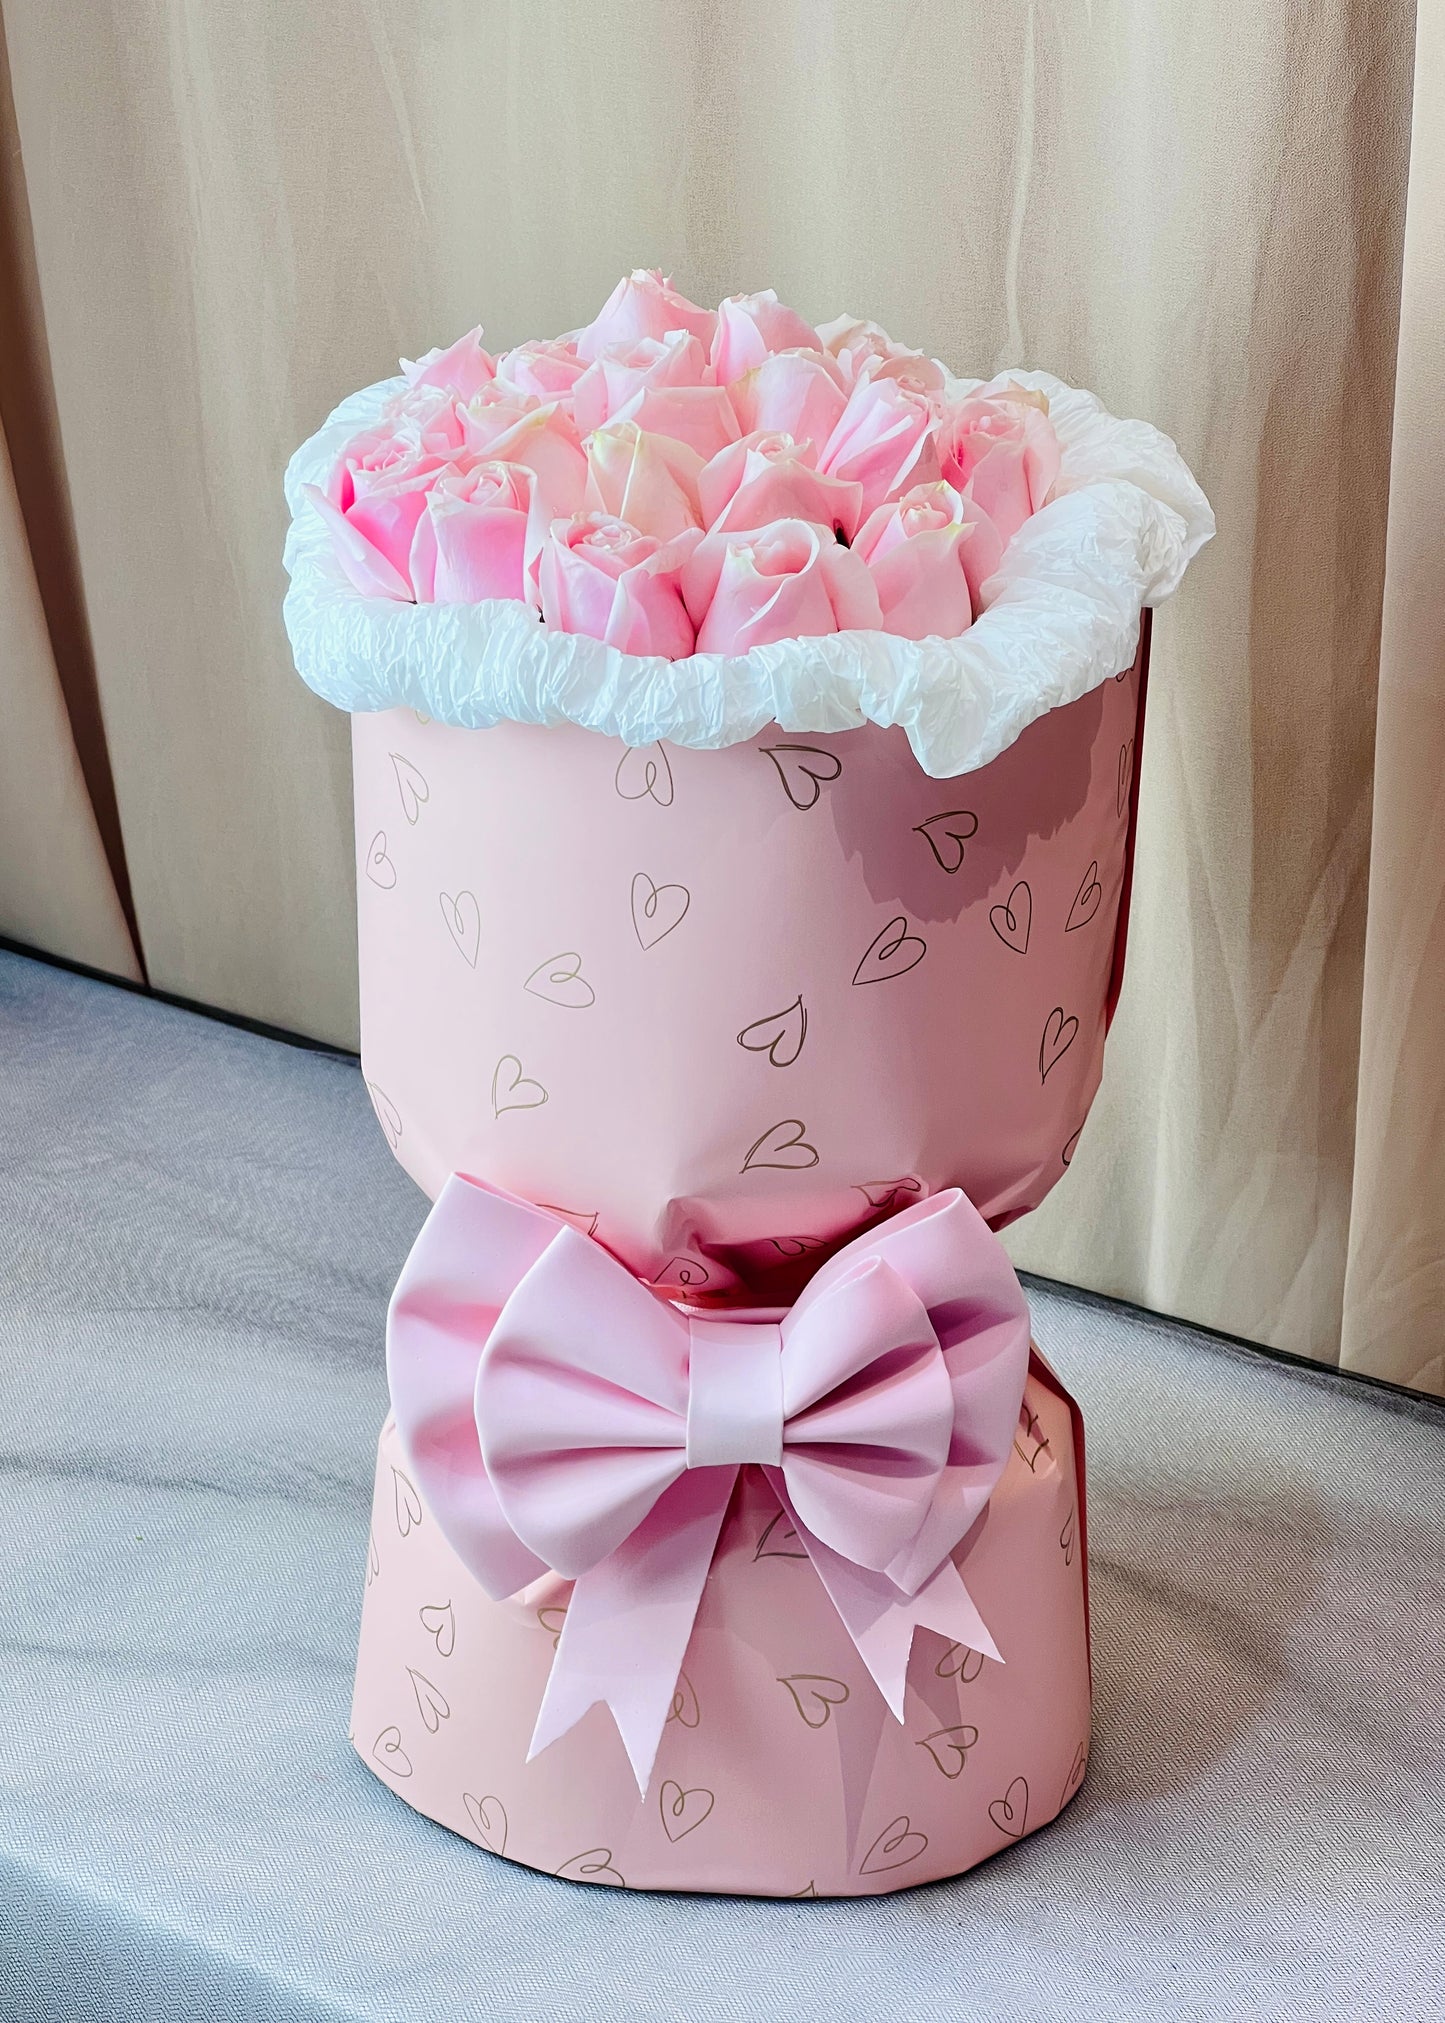 Khloe's Pink Roses | Round Flower Bouquet